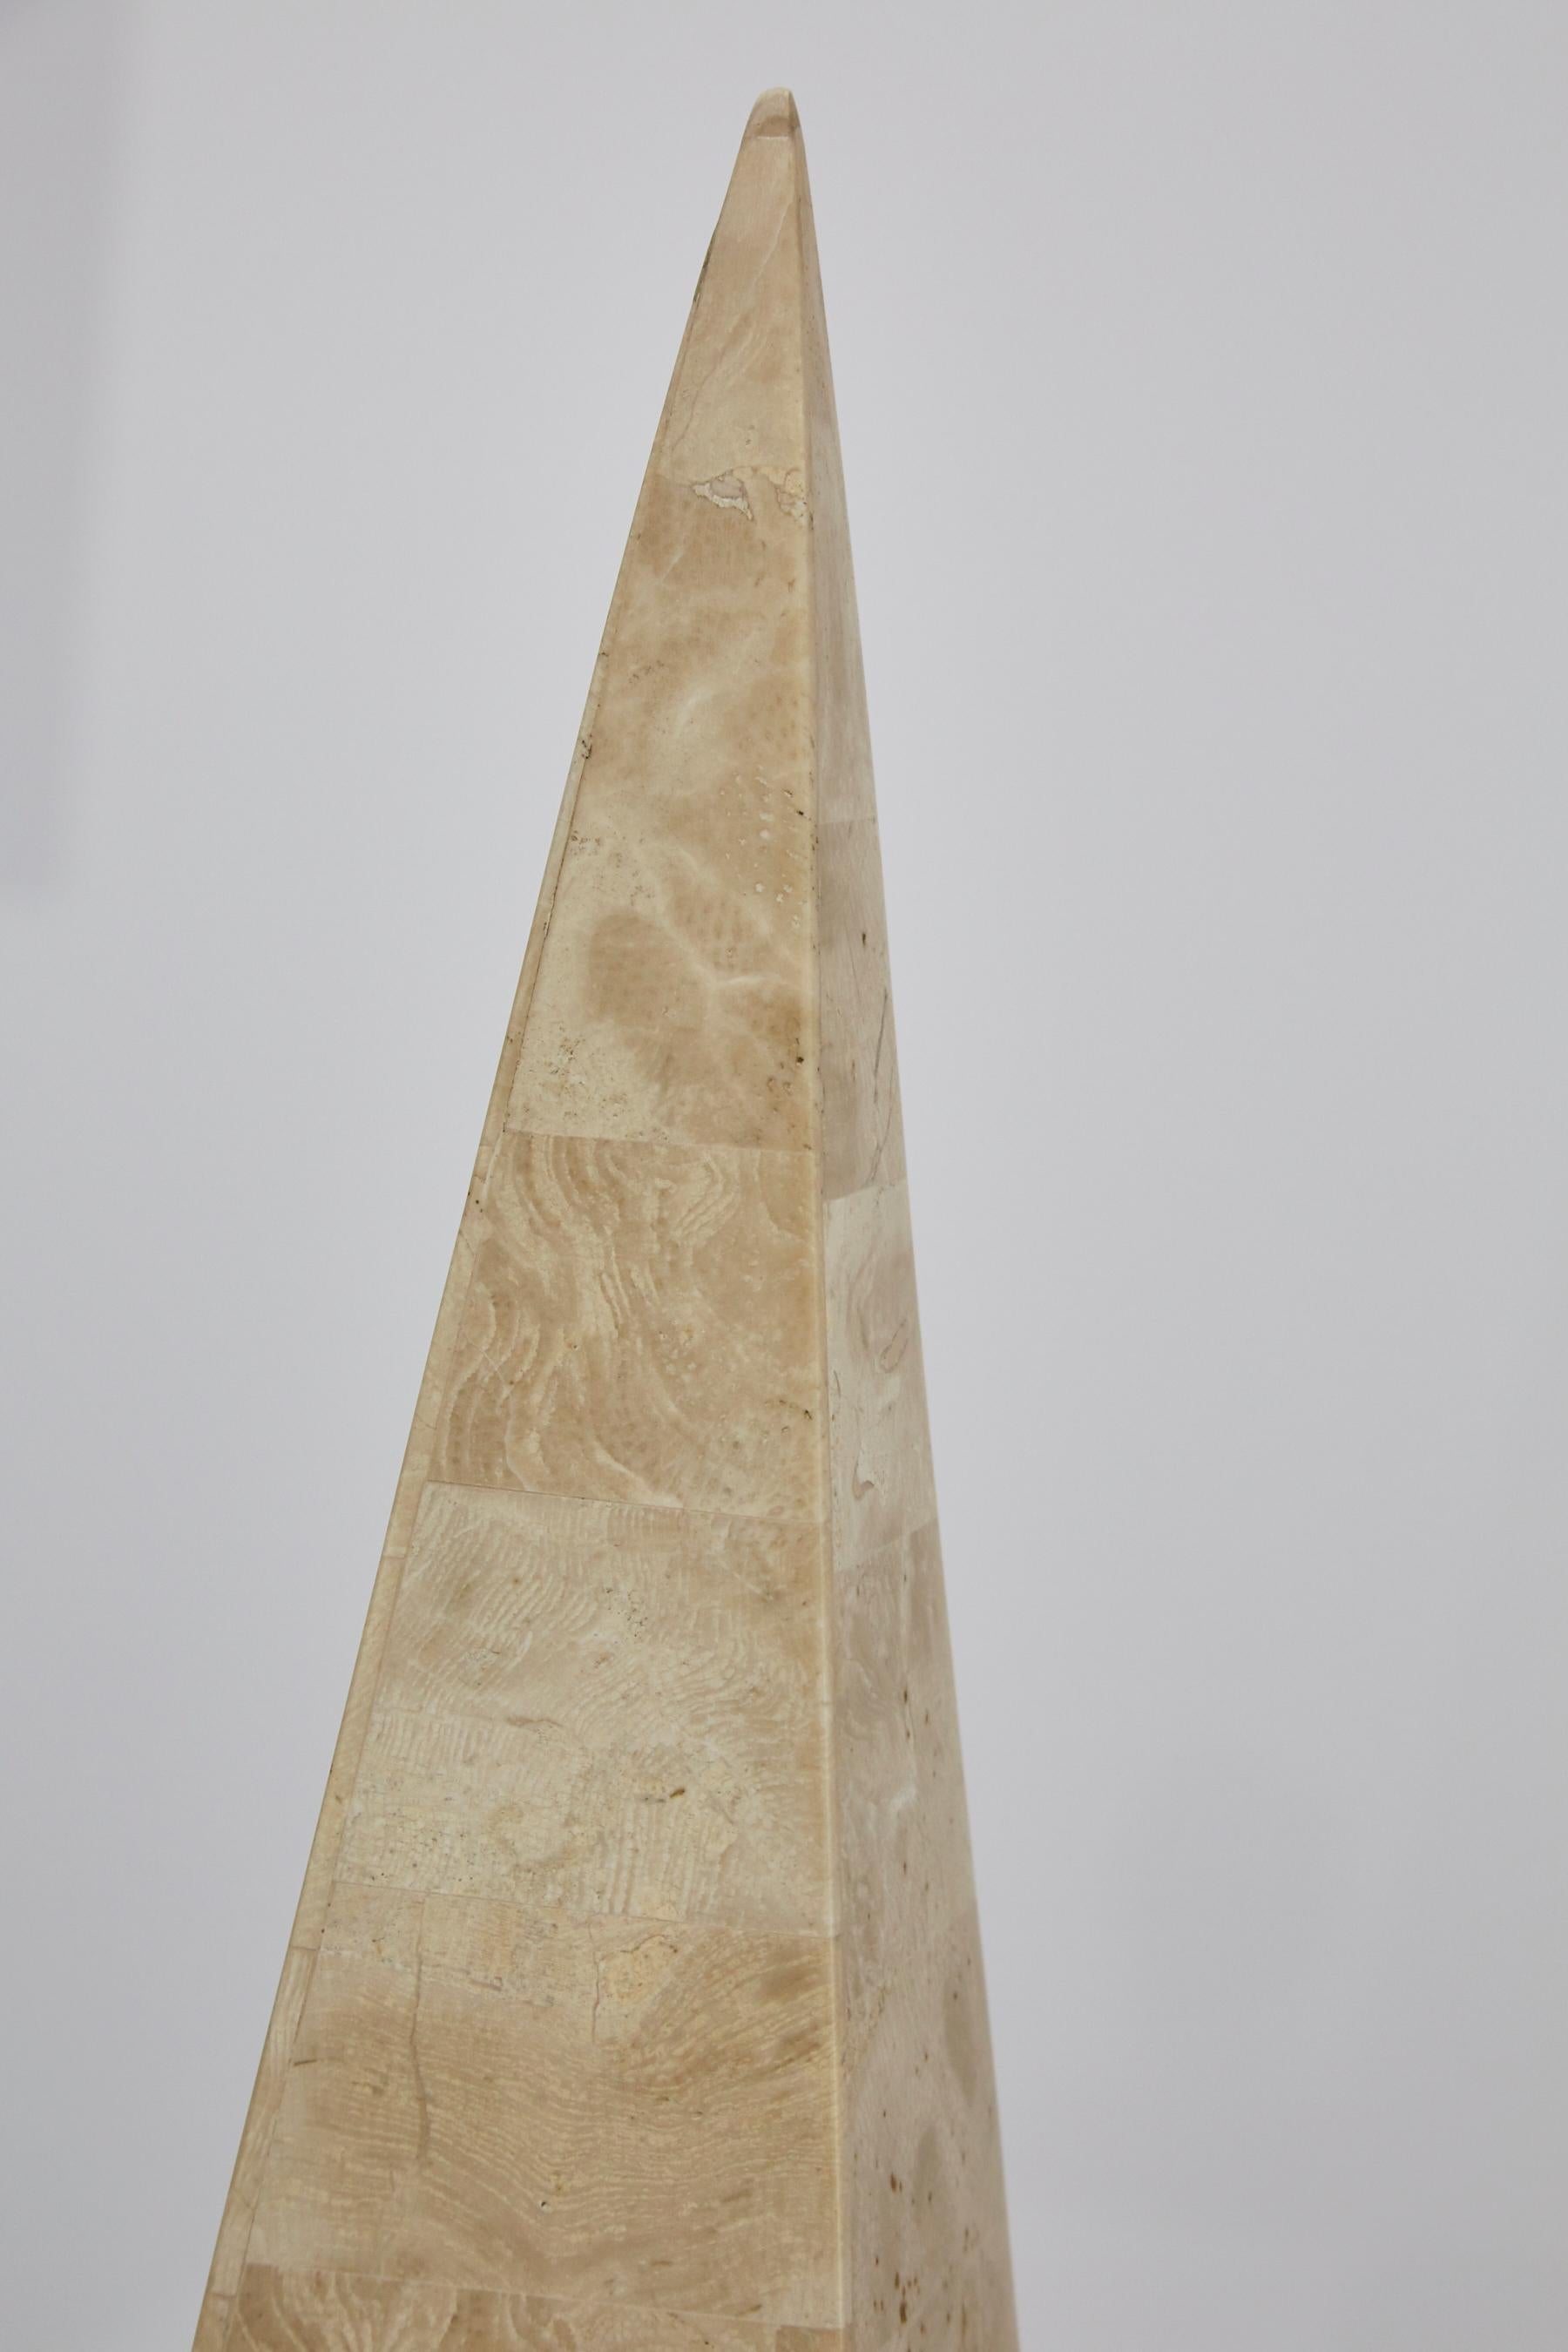 Tall 32 in. Tessellated Stone Obelisk, 1990s For Sale 6